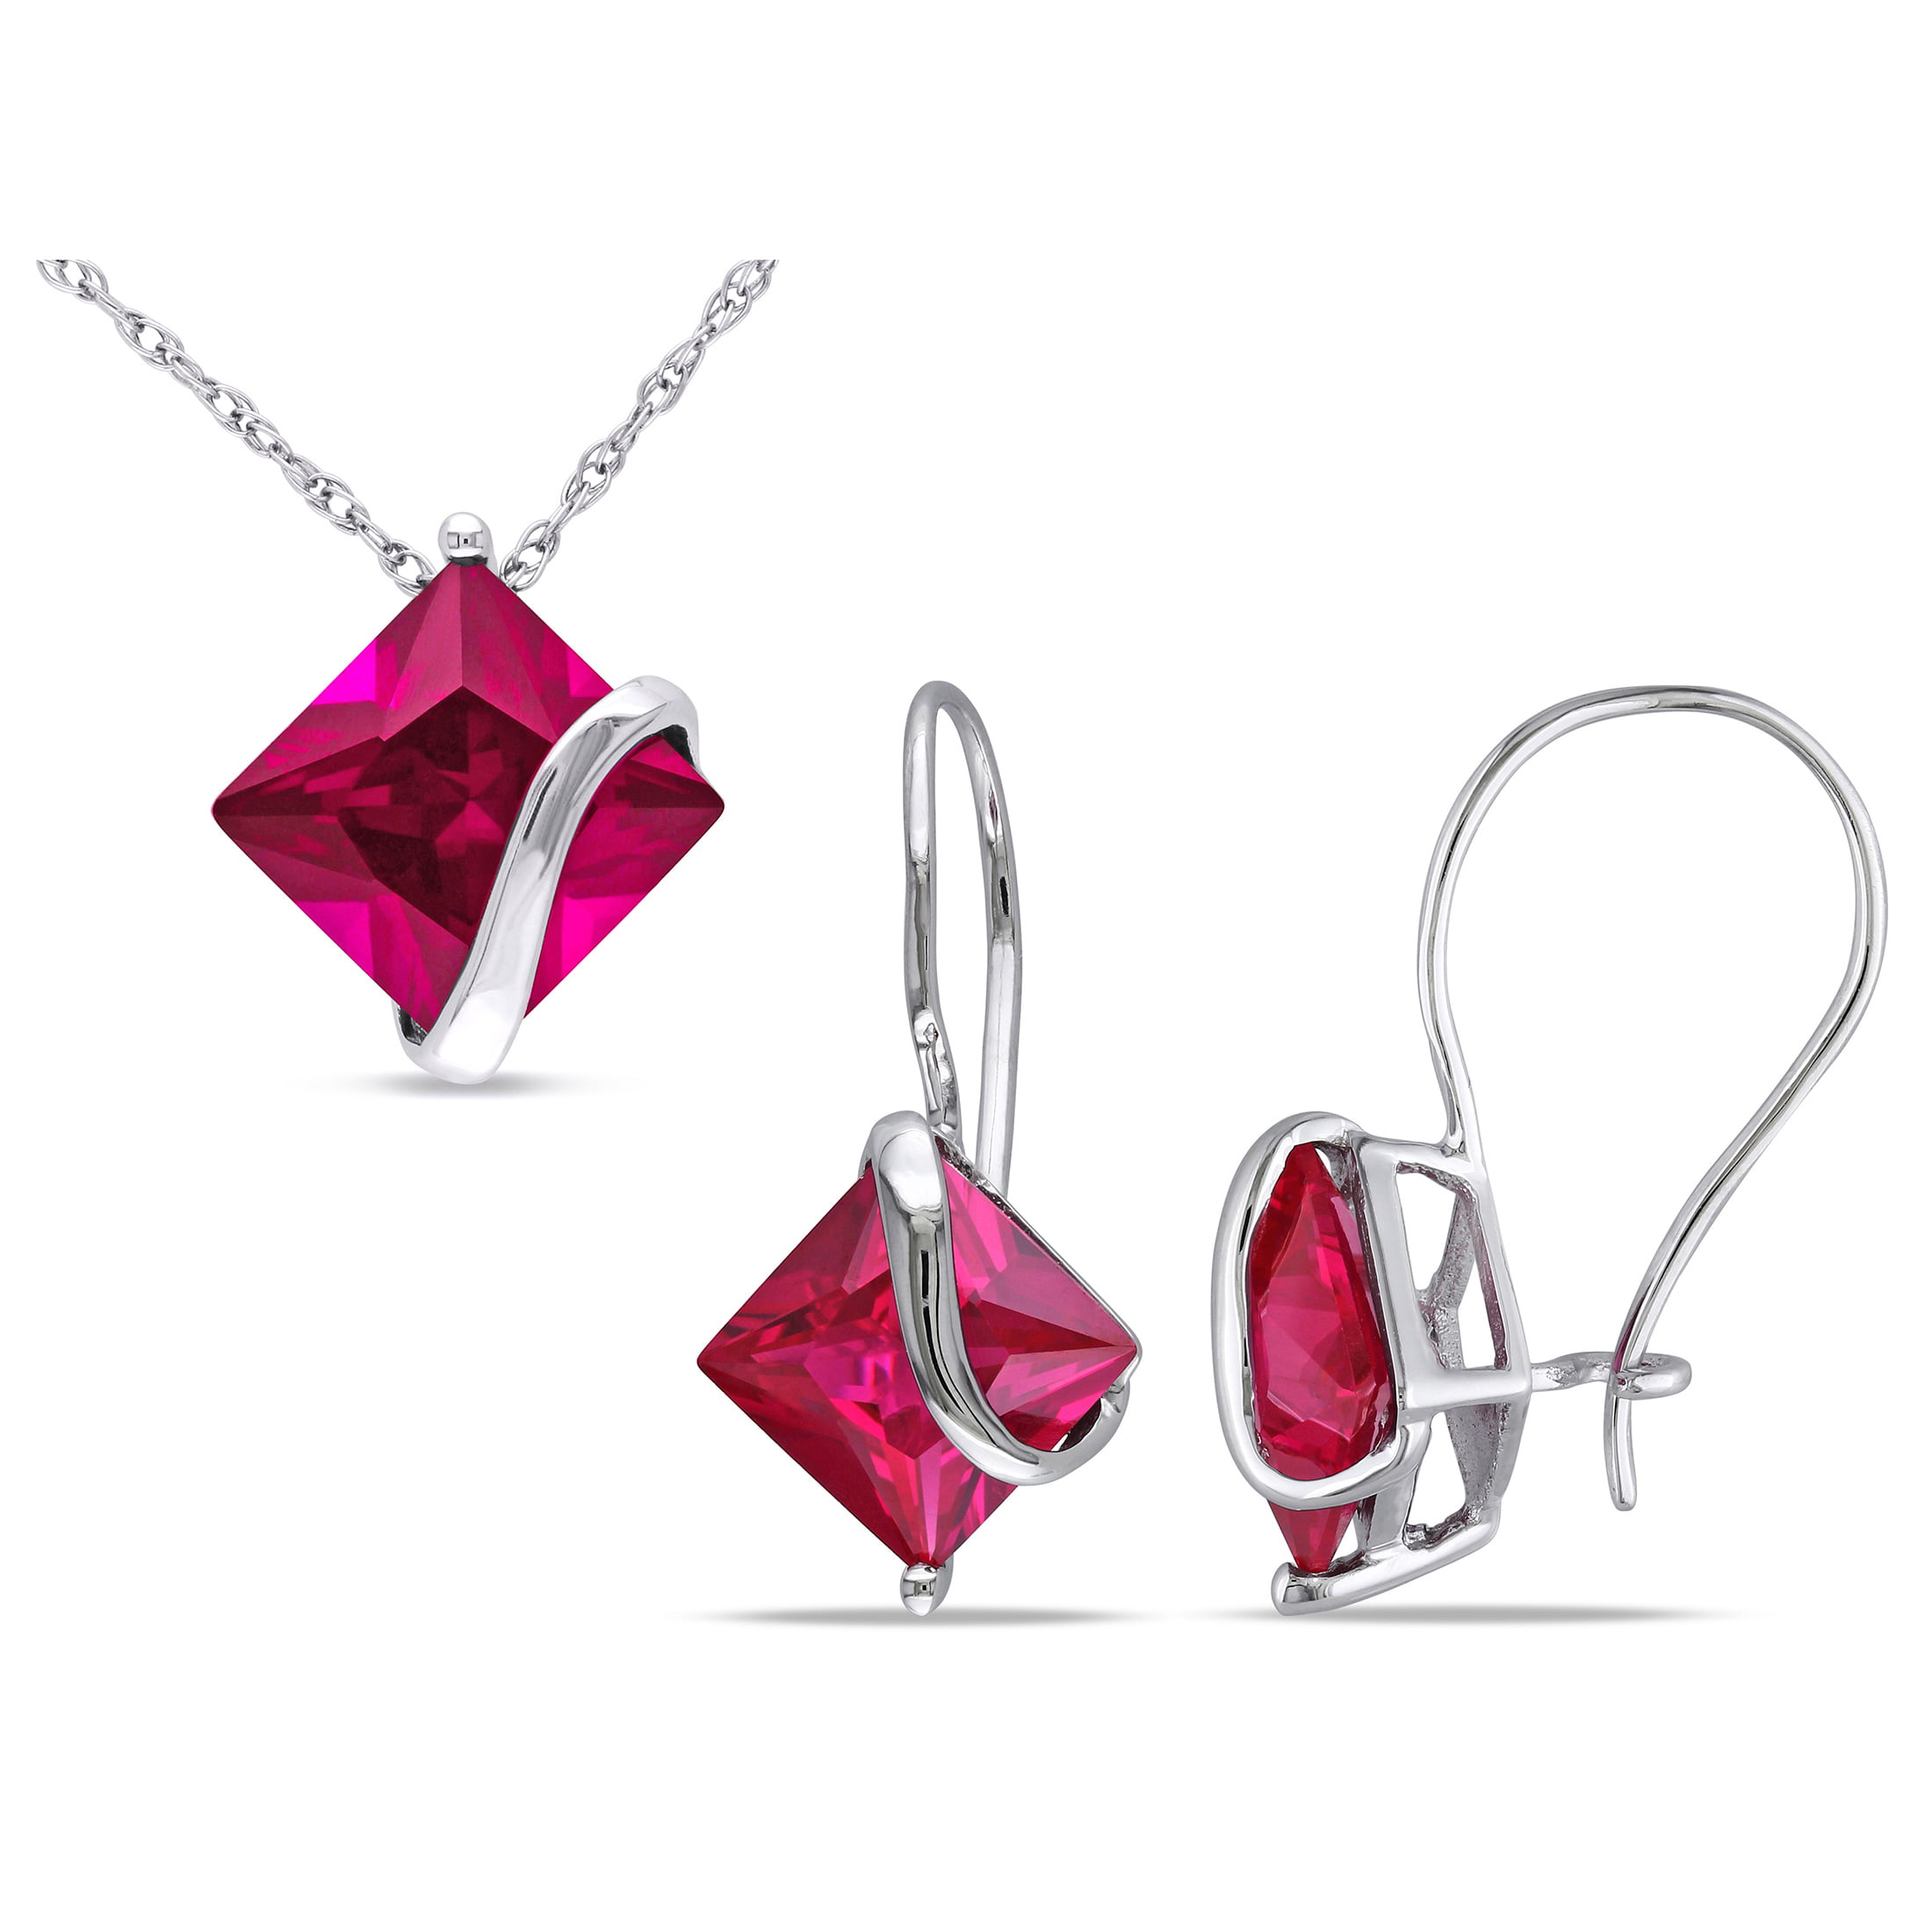 Everly Women's 7-1/4 Carat T.G.W. Square-Cut Created Ruby 10kt White ...